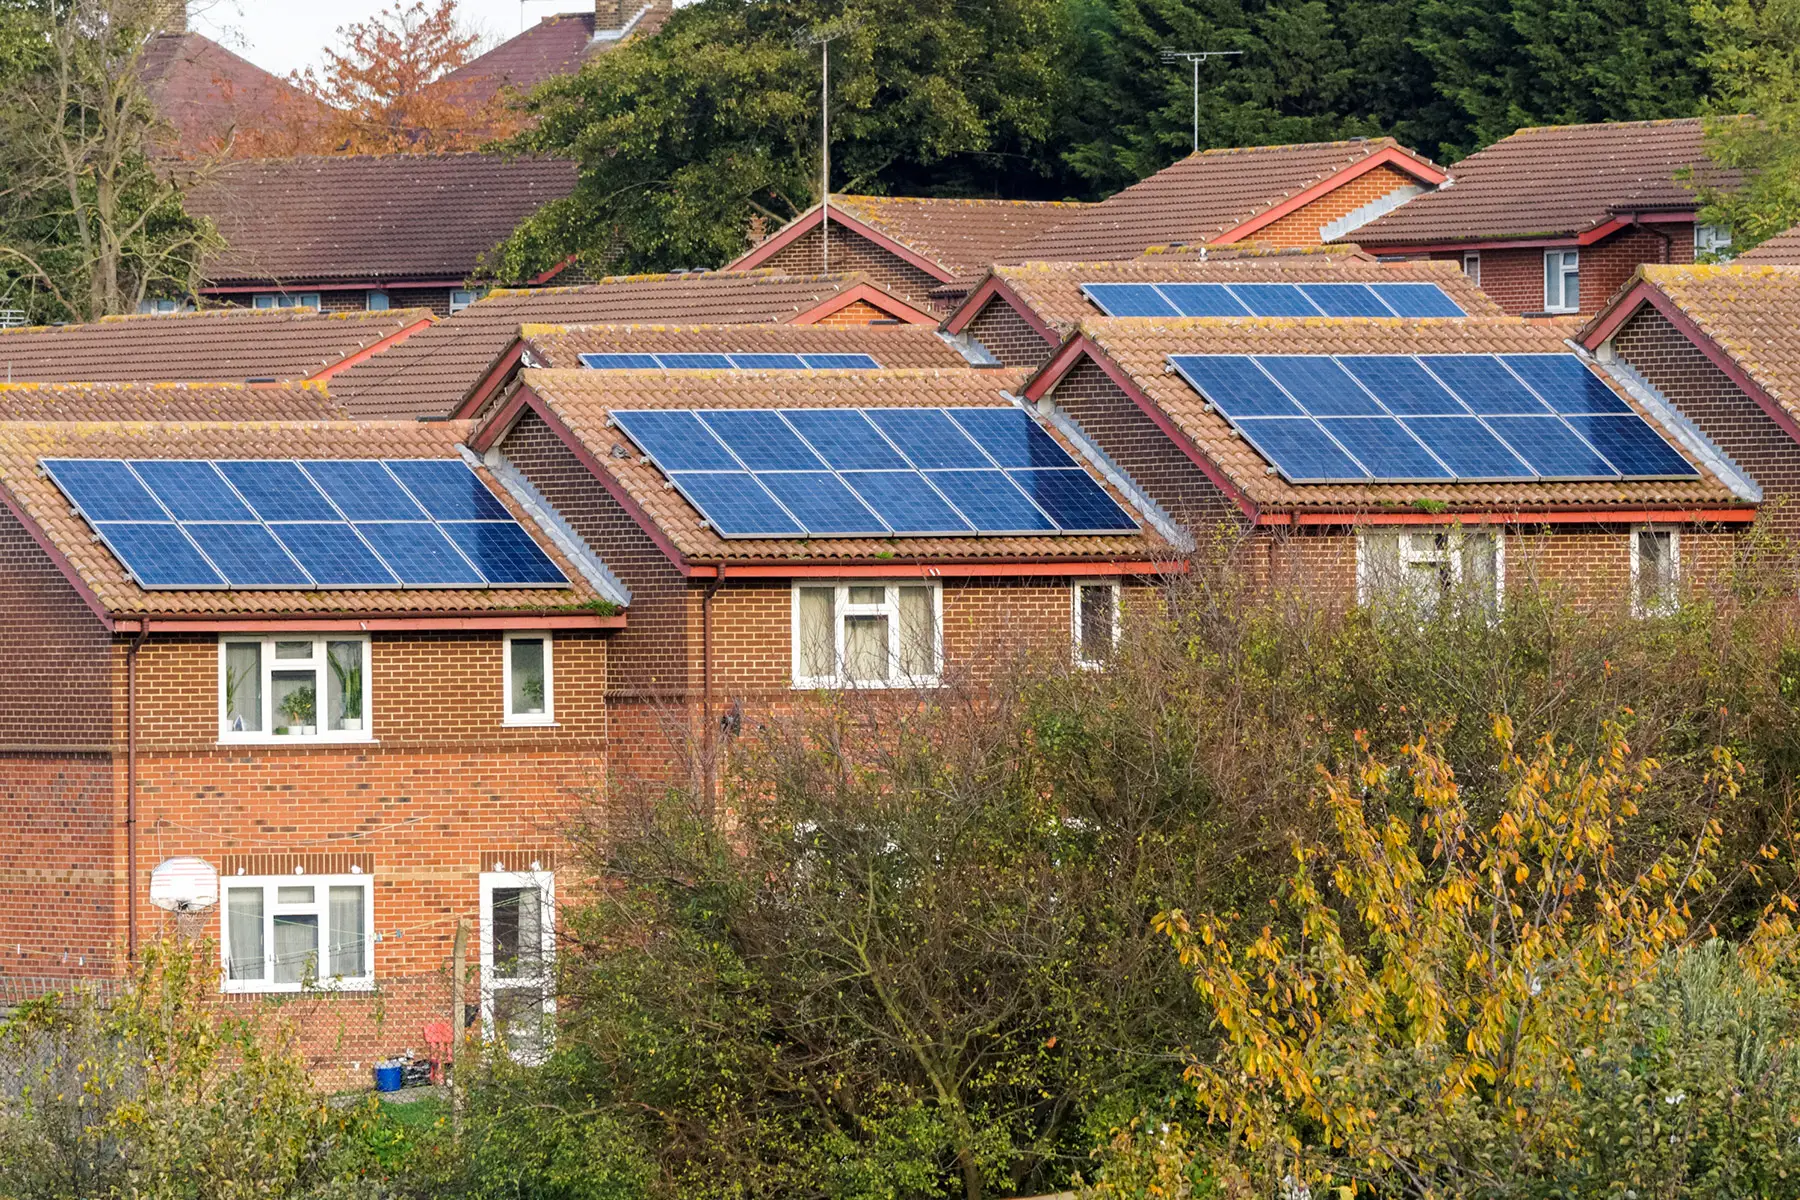 Solar panels on the roofs of houses in London